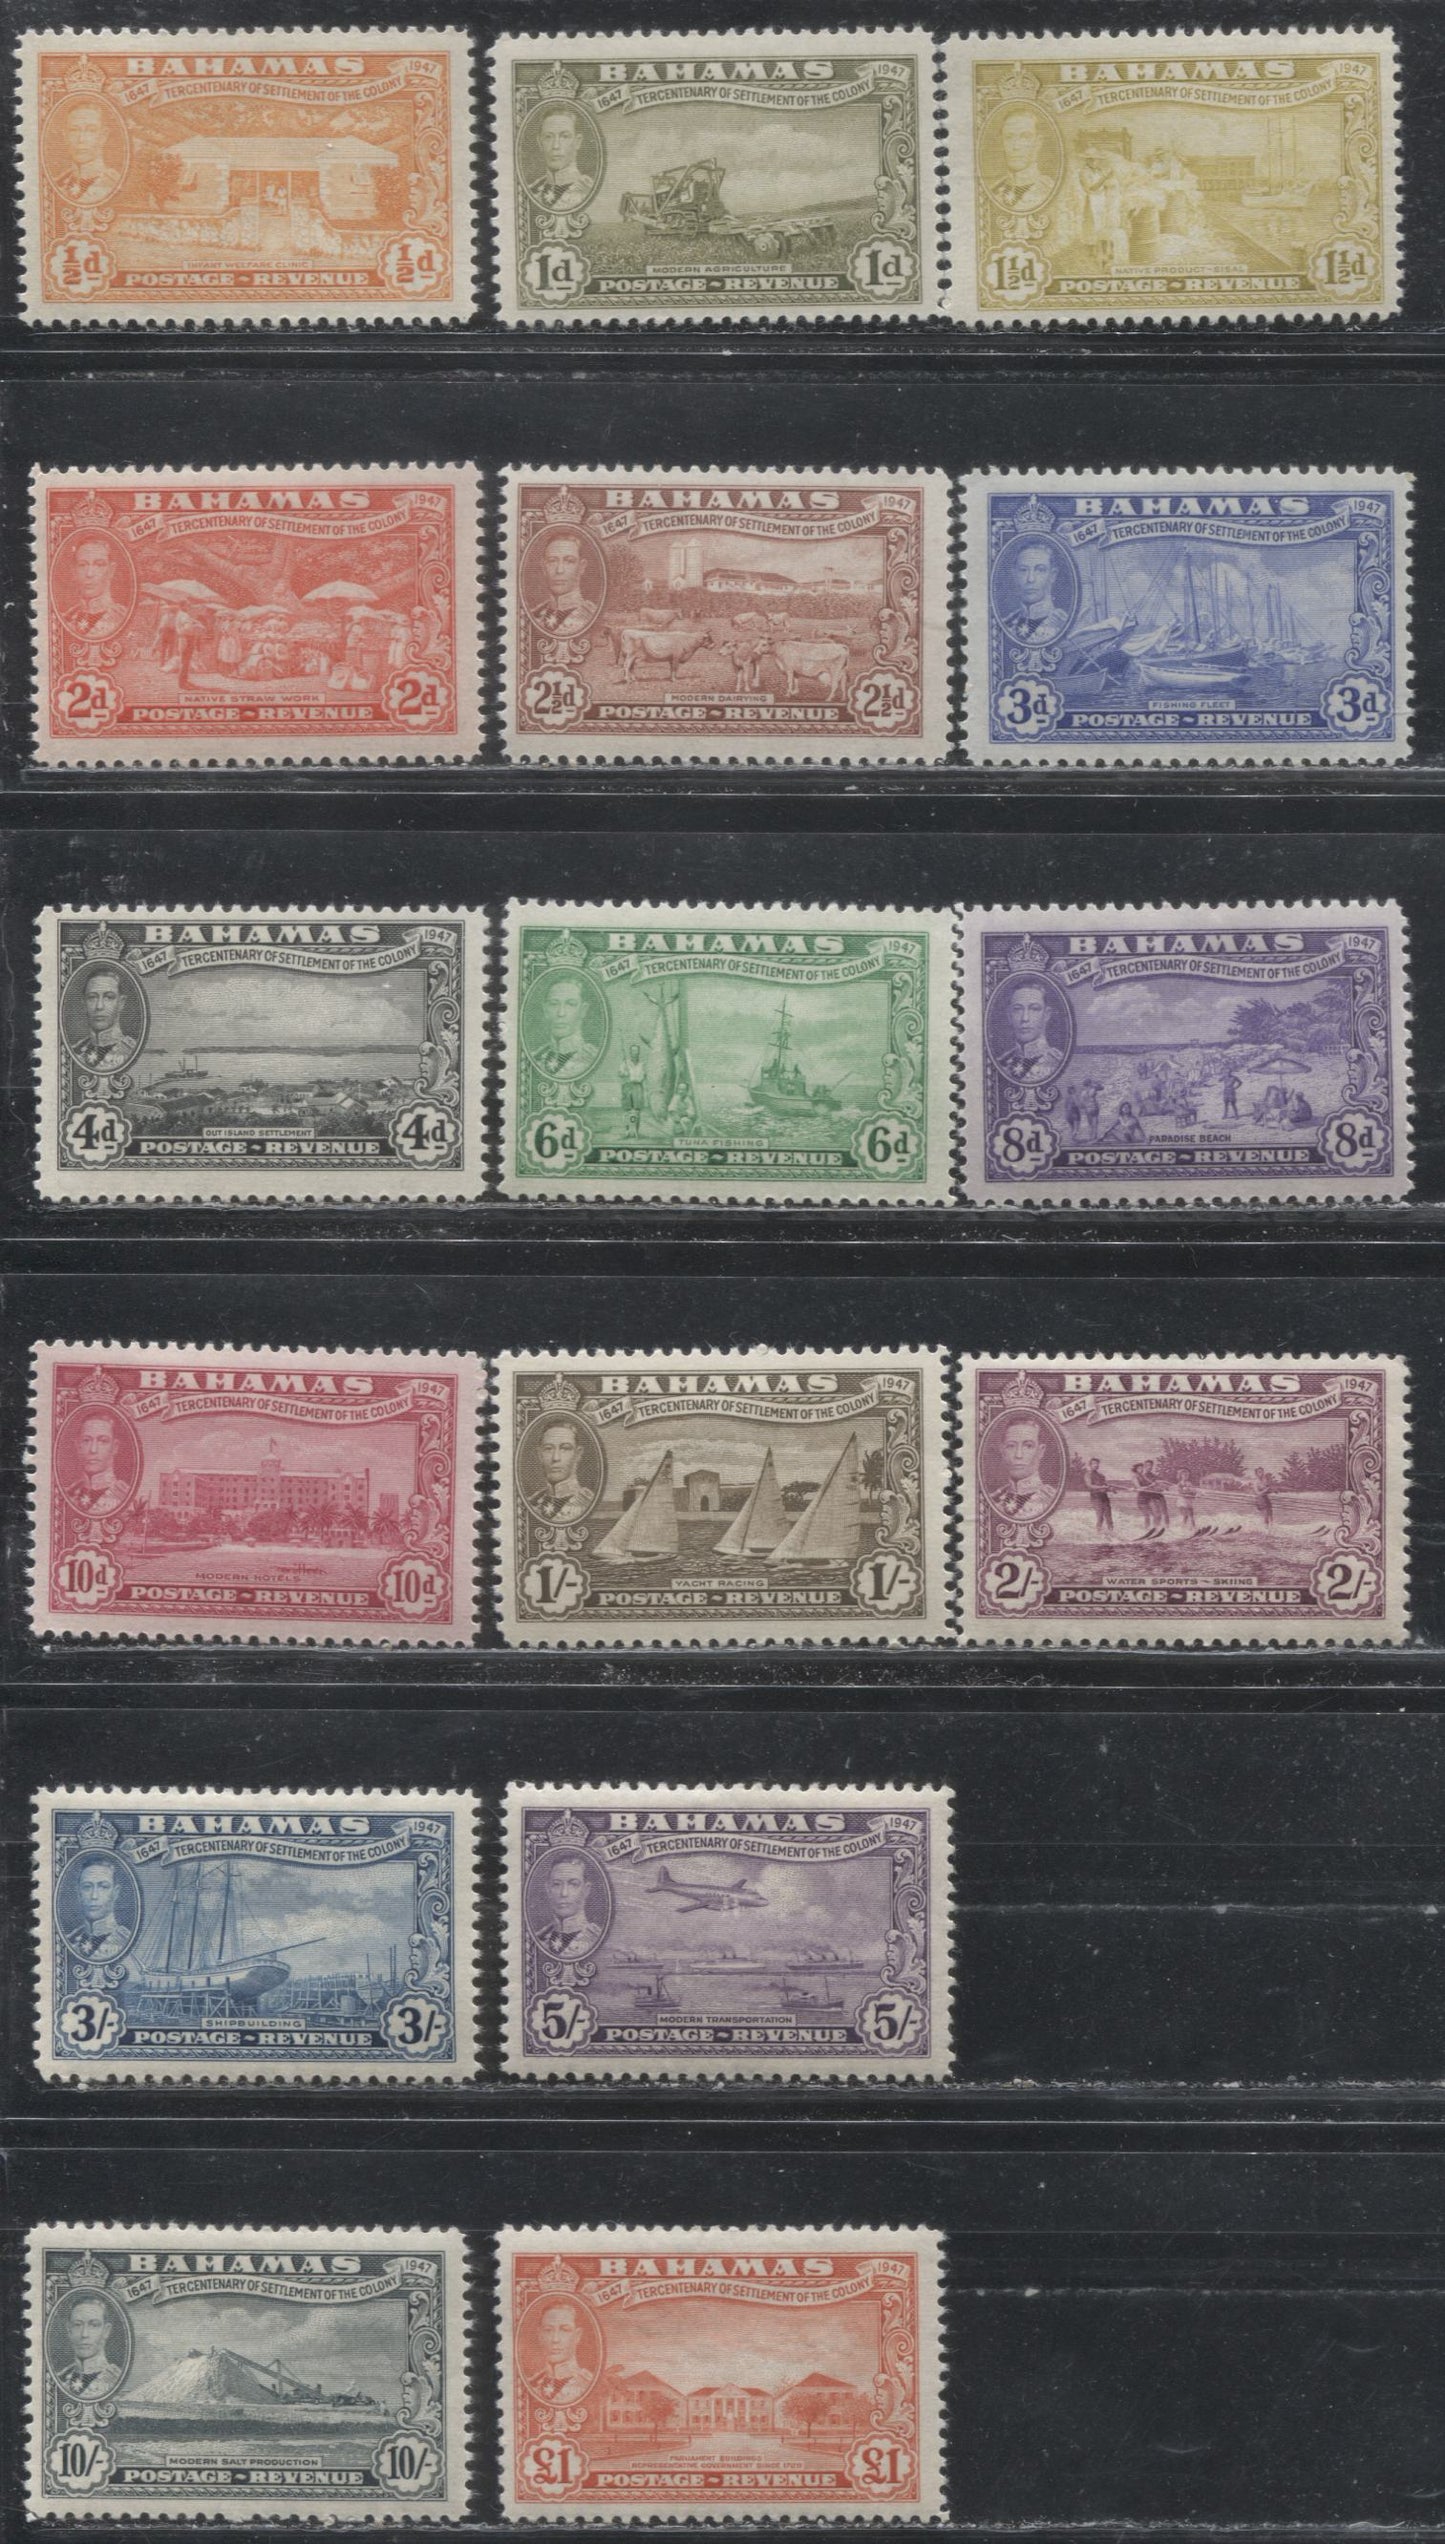 Bahamas SG#178-193 1948 Tercentenary of the Elutheran Settlement Issue, a F/VF LH Complete Set